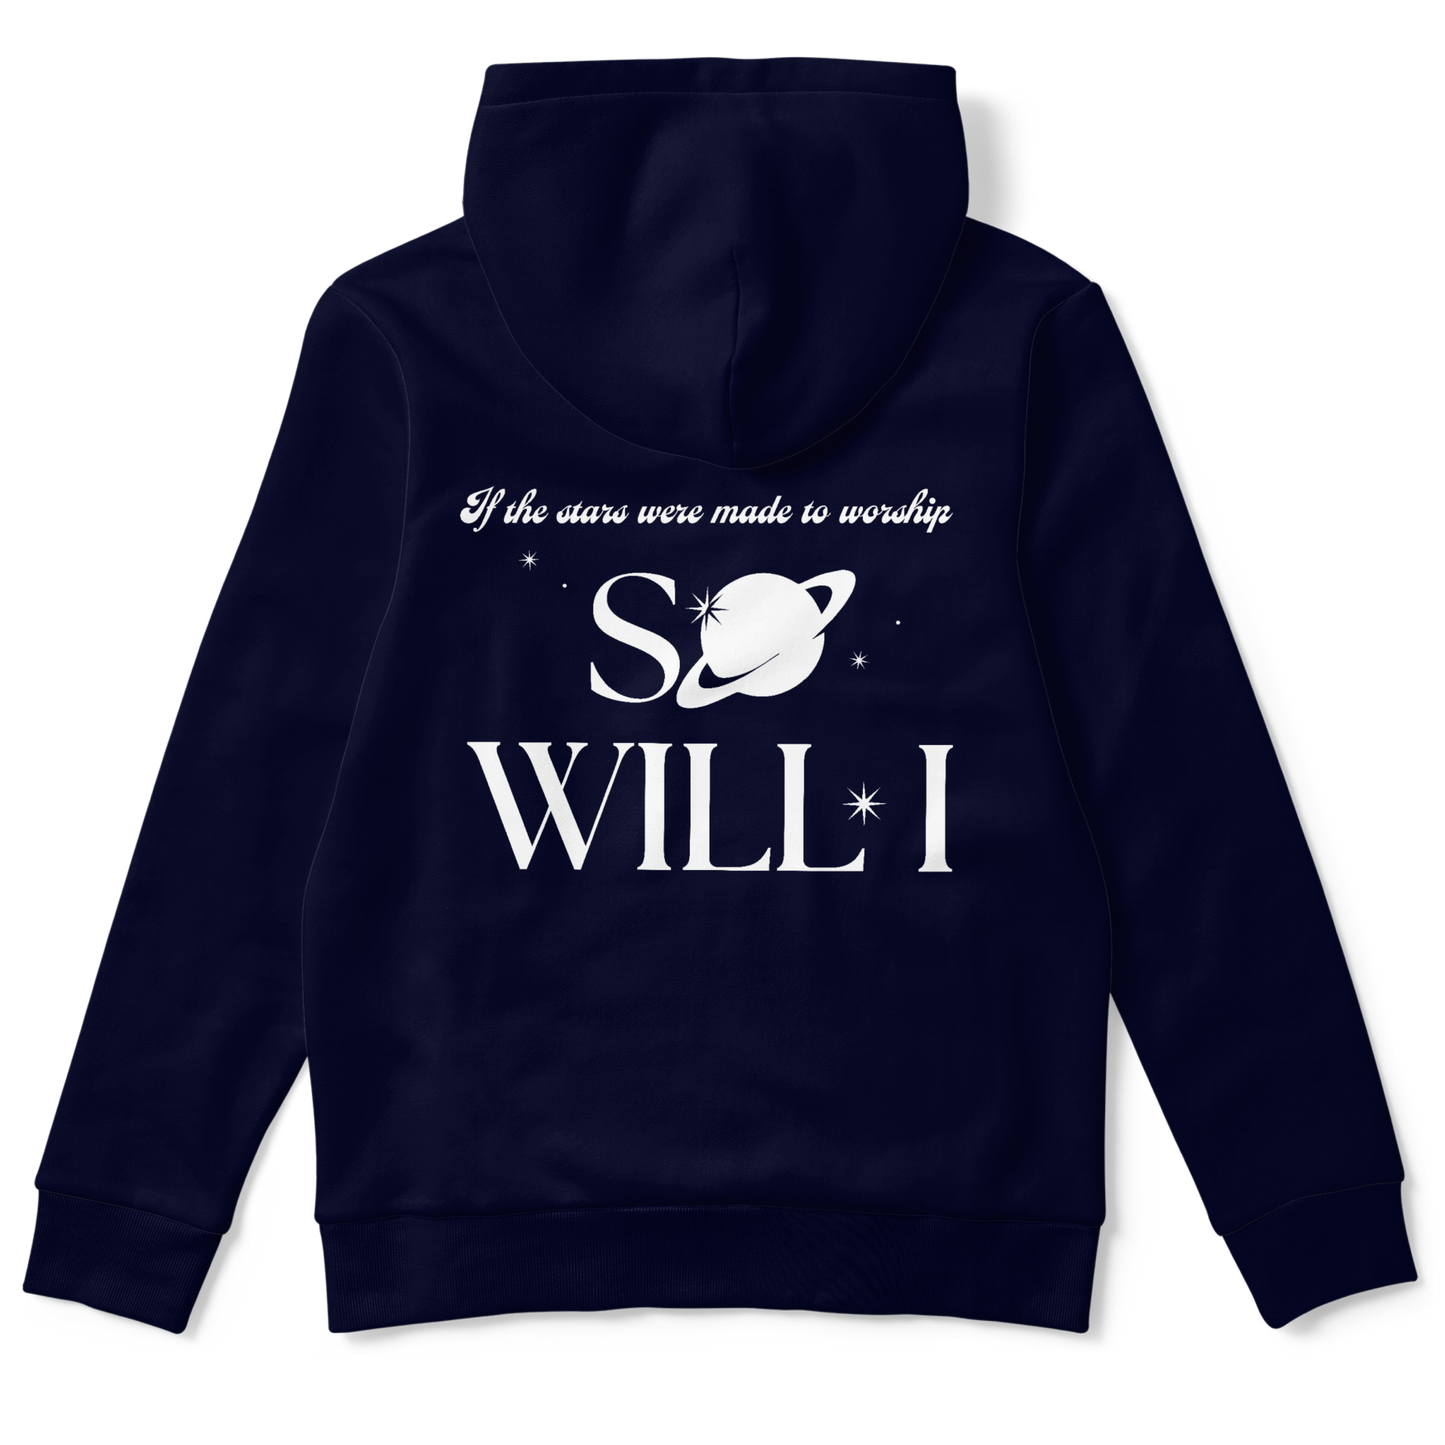 "SO WILL I" HOODIE